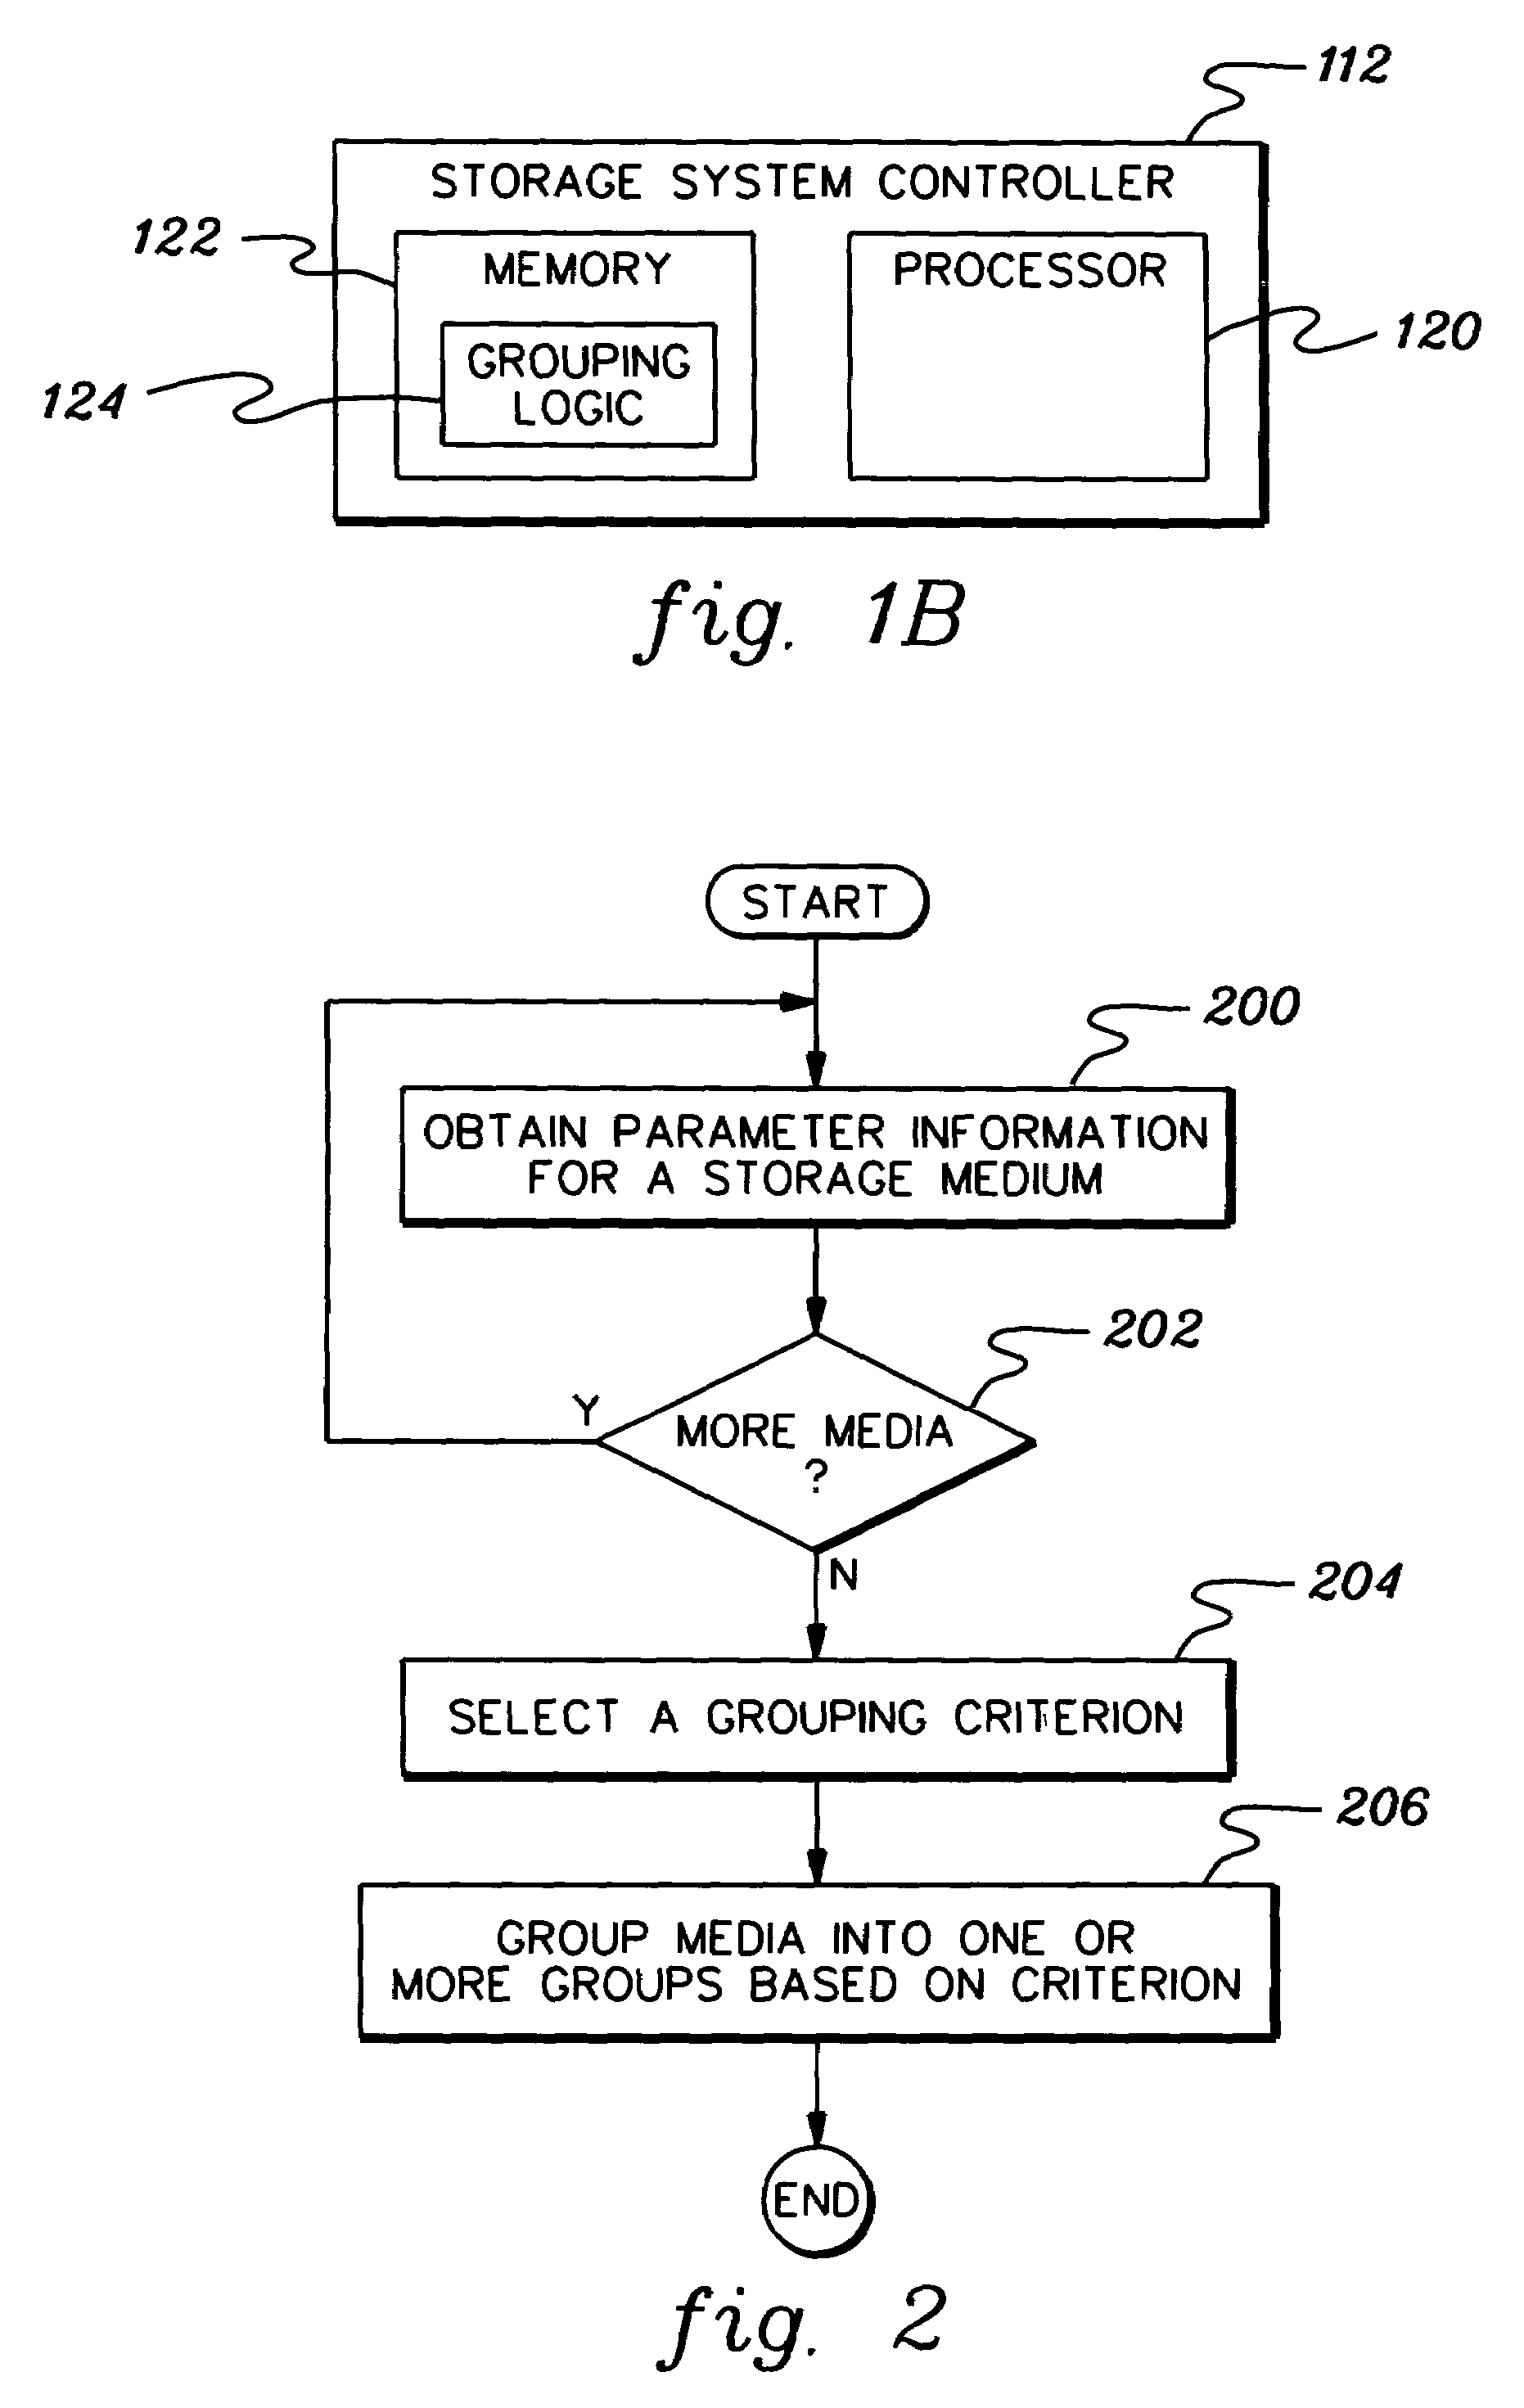 Automatic collection and dissemination of product usage information